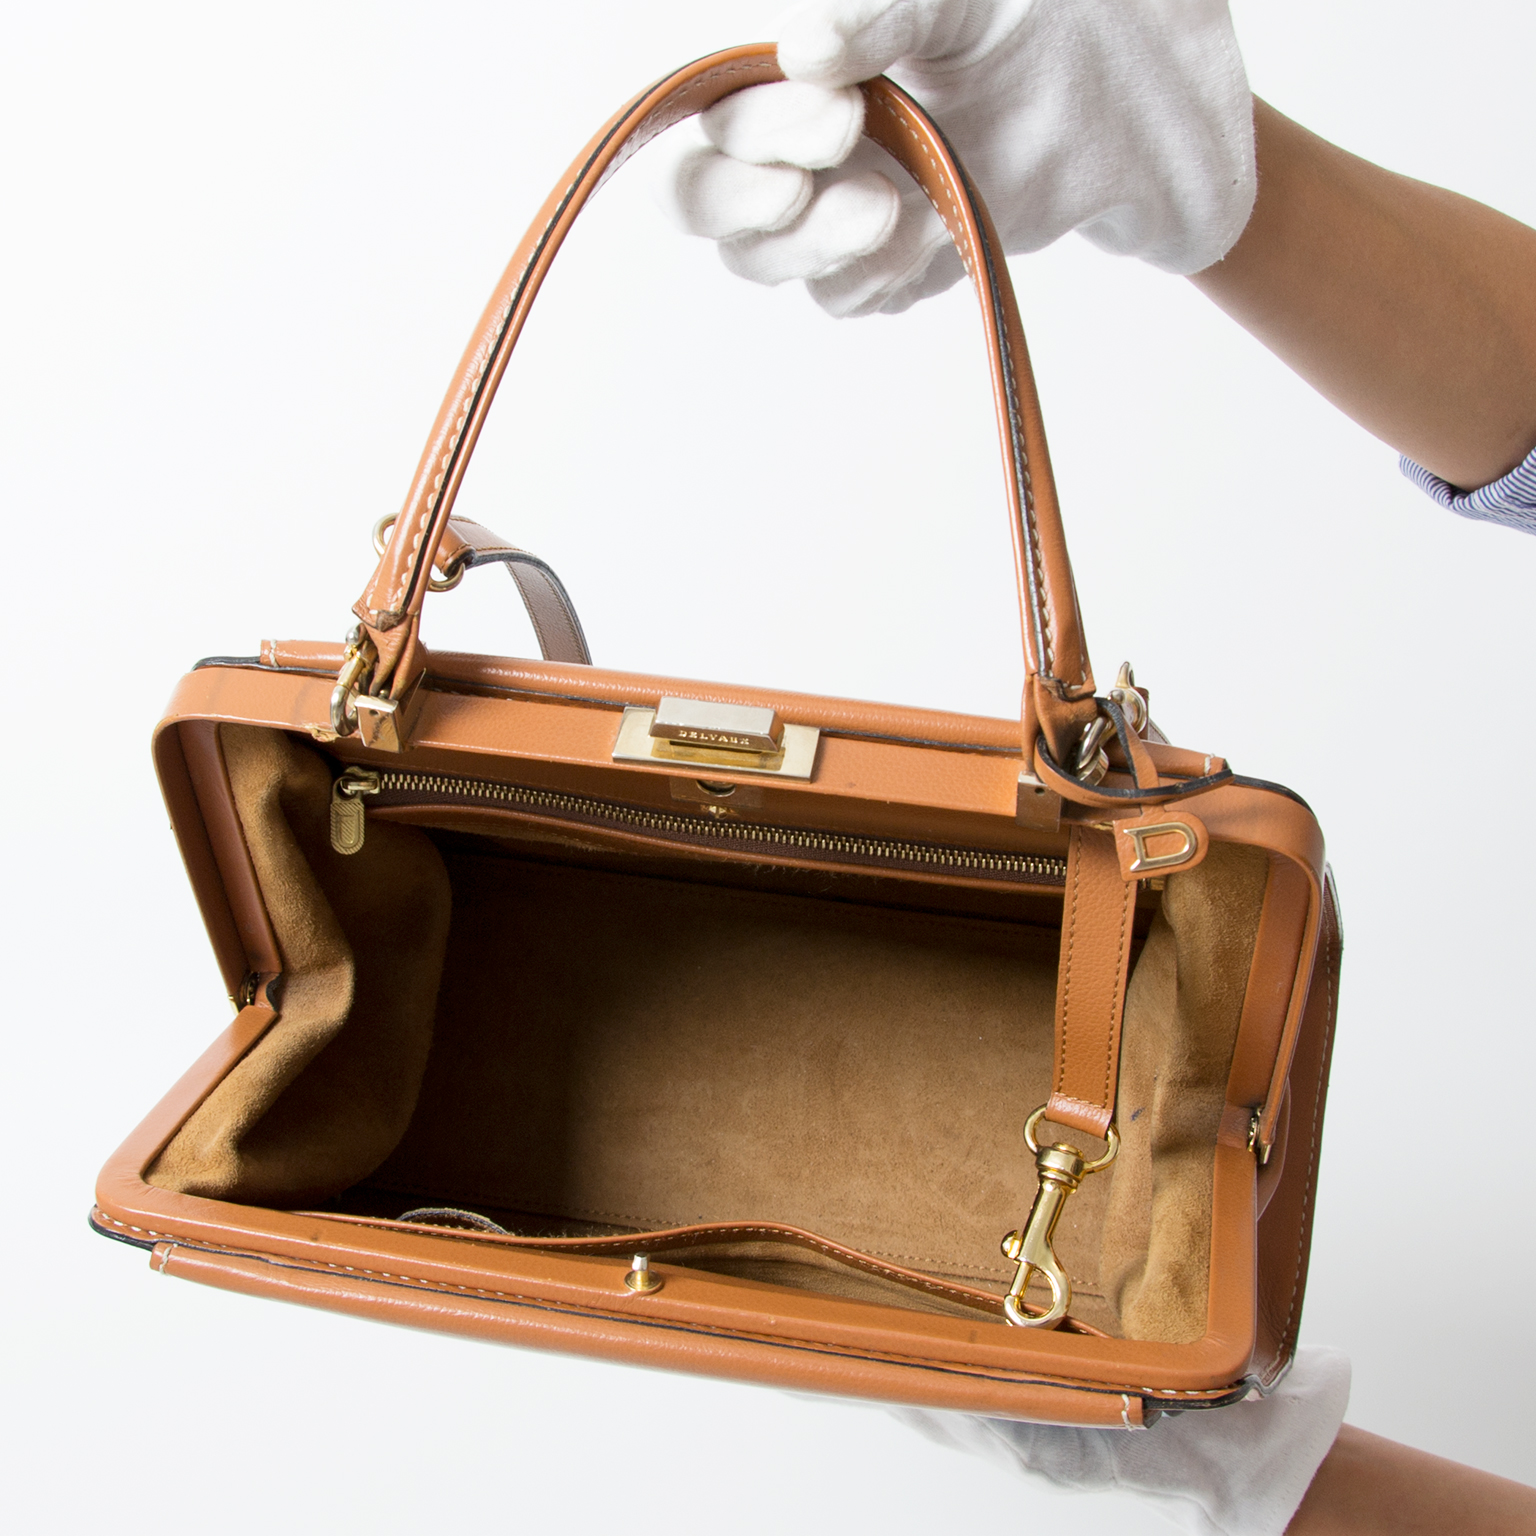 discover delvaux's leather heritage in the so cool handbag video by TAVO